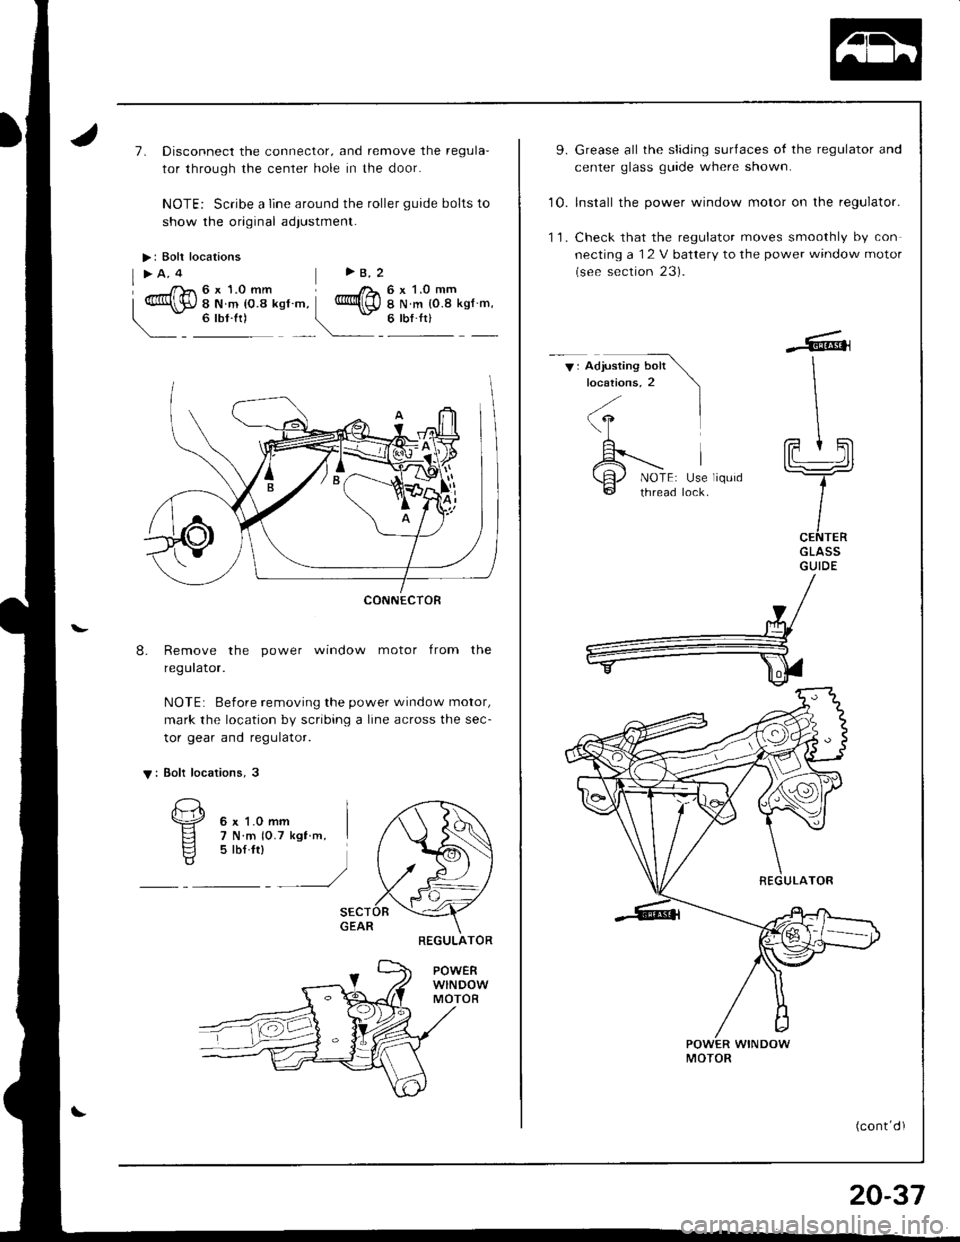 HONDA INTEGRA 1998 4.G Workshop Manual >: Bolt locations
l>A.4 >8.2
d|63il;o,ilIu- *,@ 
i6pl-". 
- 6rbr.ftr _!
7. Disconnect the connector, and remove the regula
tor through the cenler hole in the door.
NOTE: Scribe a line around the rol